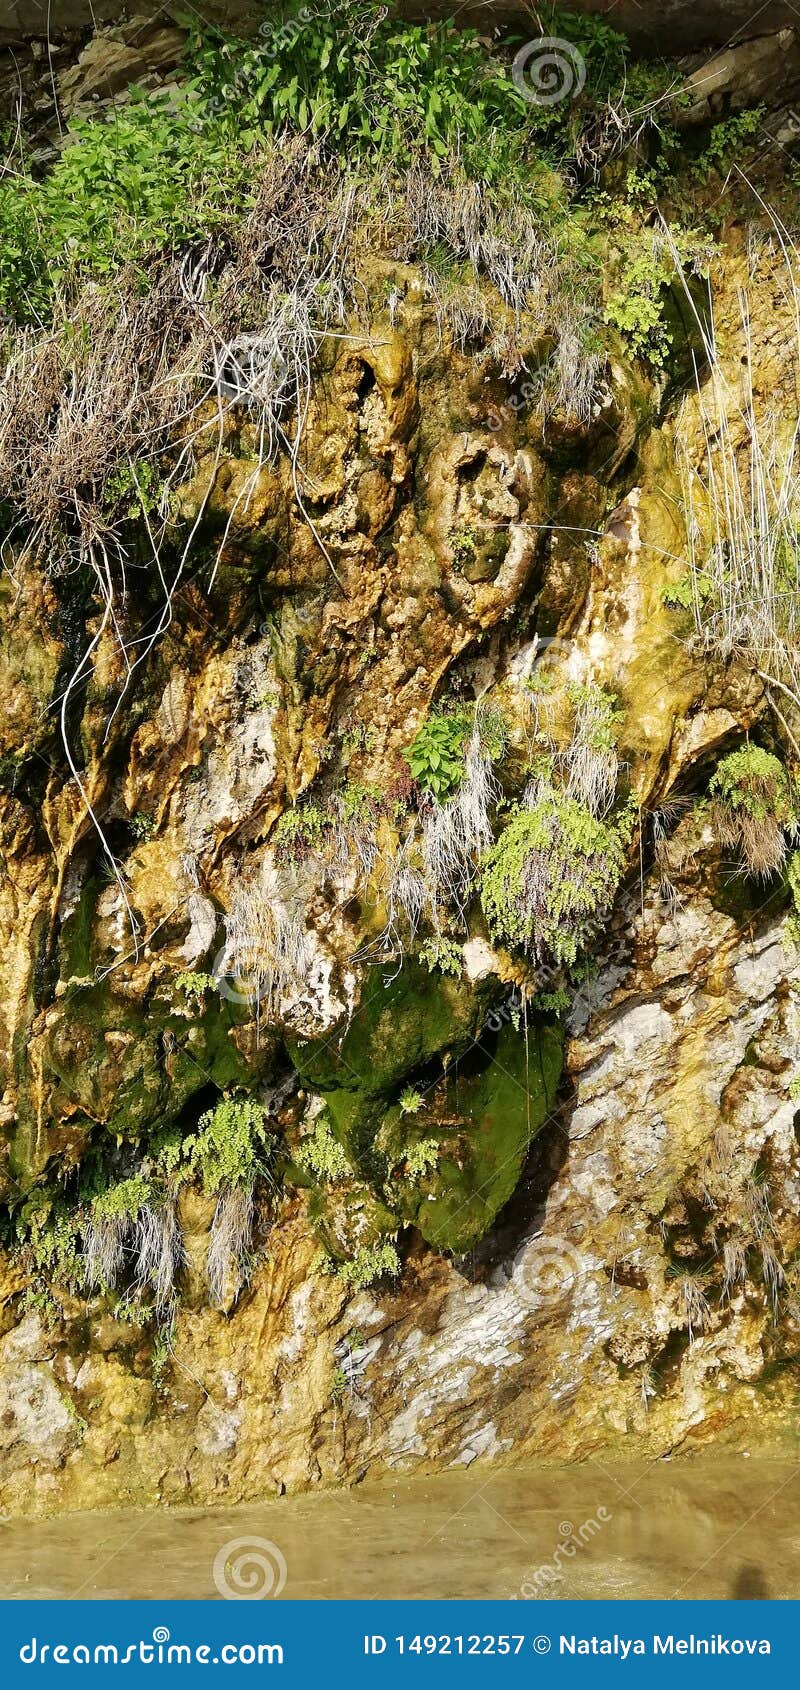 background. freakish cliffs covered with moss and plants. a rare natural phenomenon - weeping rocks.